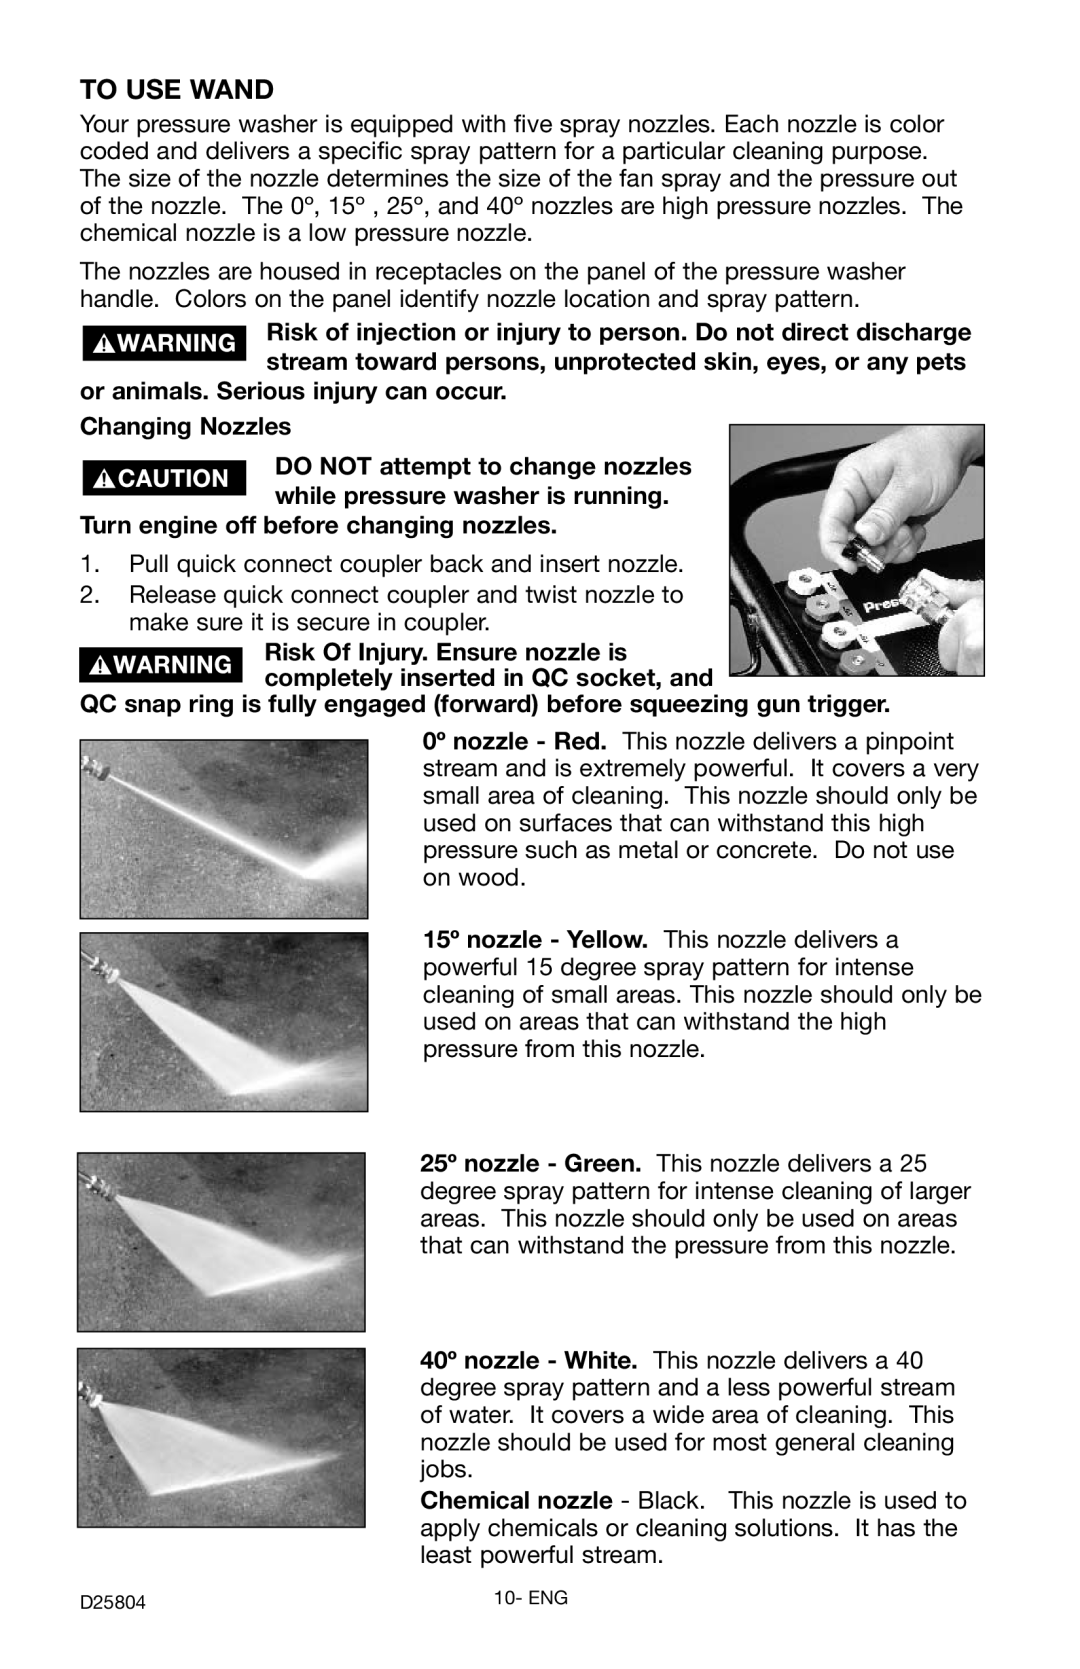 Porter-Cable D25804-025-1, PCH2600C instruction manual To Use Wand, or animals. Serious injury can occur Changing Nozzles 